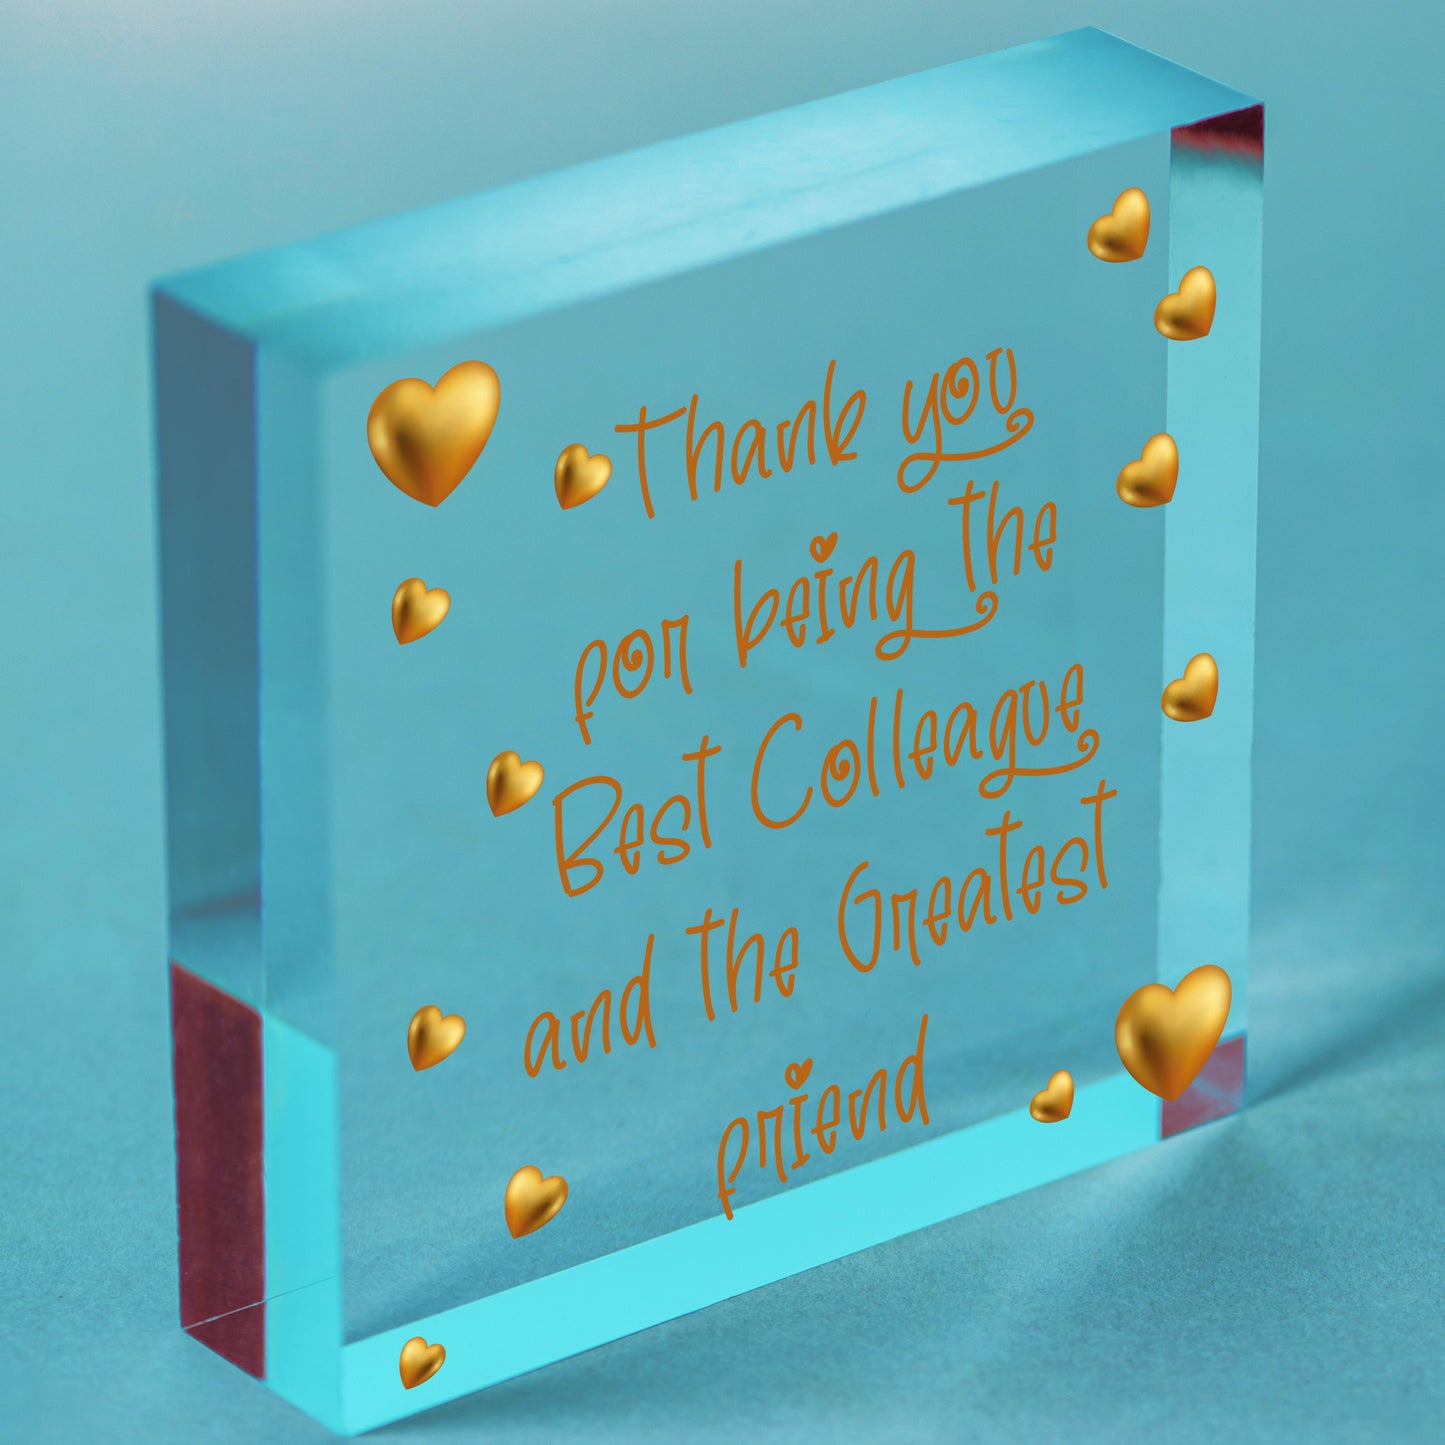 Thank You Wood Heart Plaque Friendship Gift For Colleague Friend New Job Present Free-Standing Block